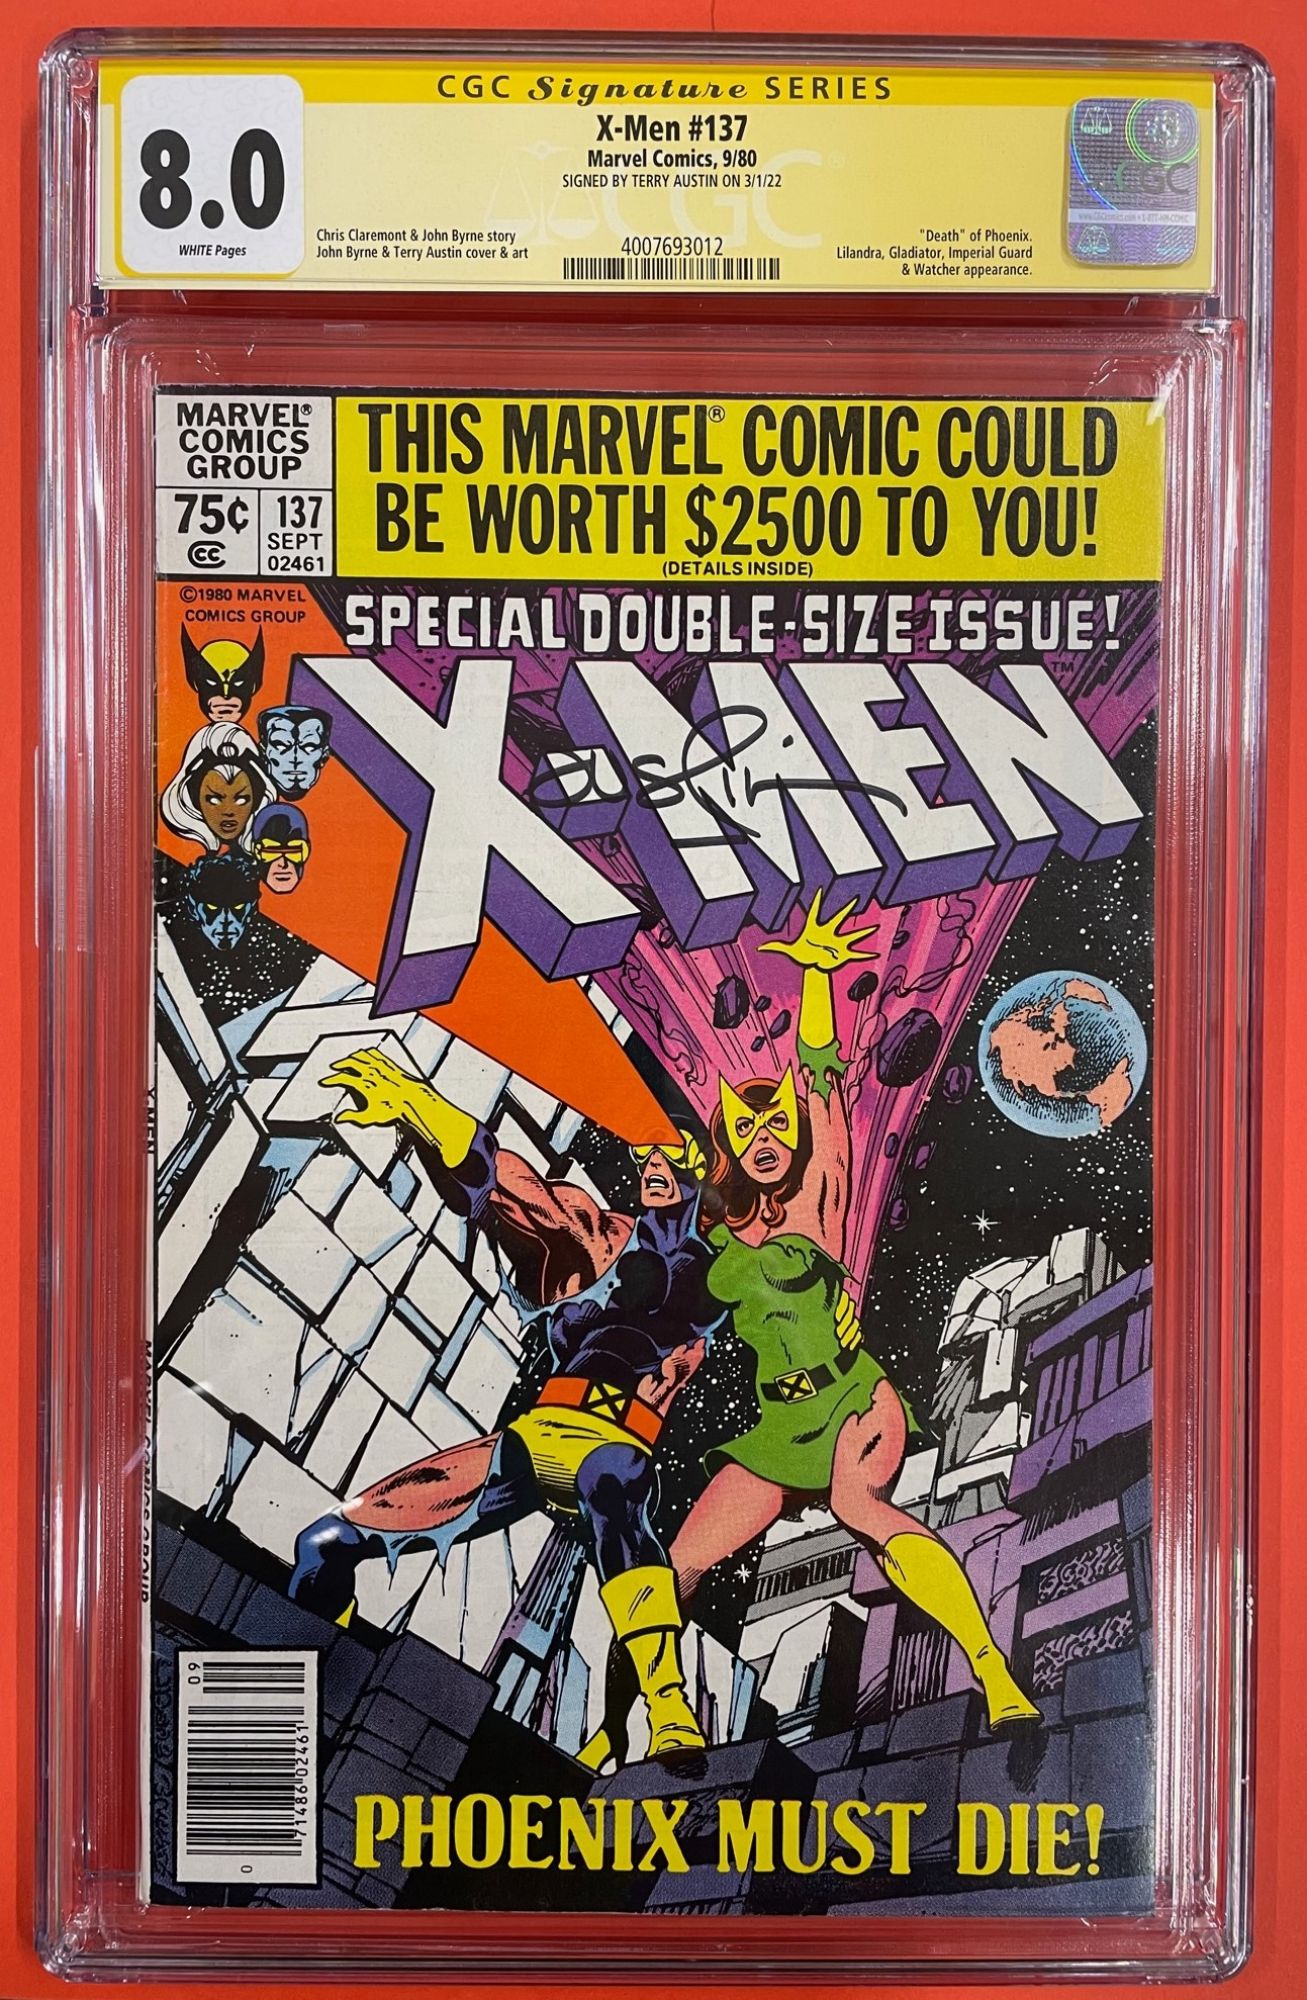 X-Men #137, Sep 1980, 8.0 VF, CGC Signed By Terry Austin